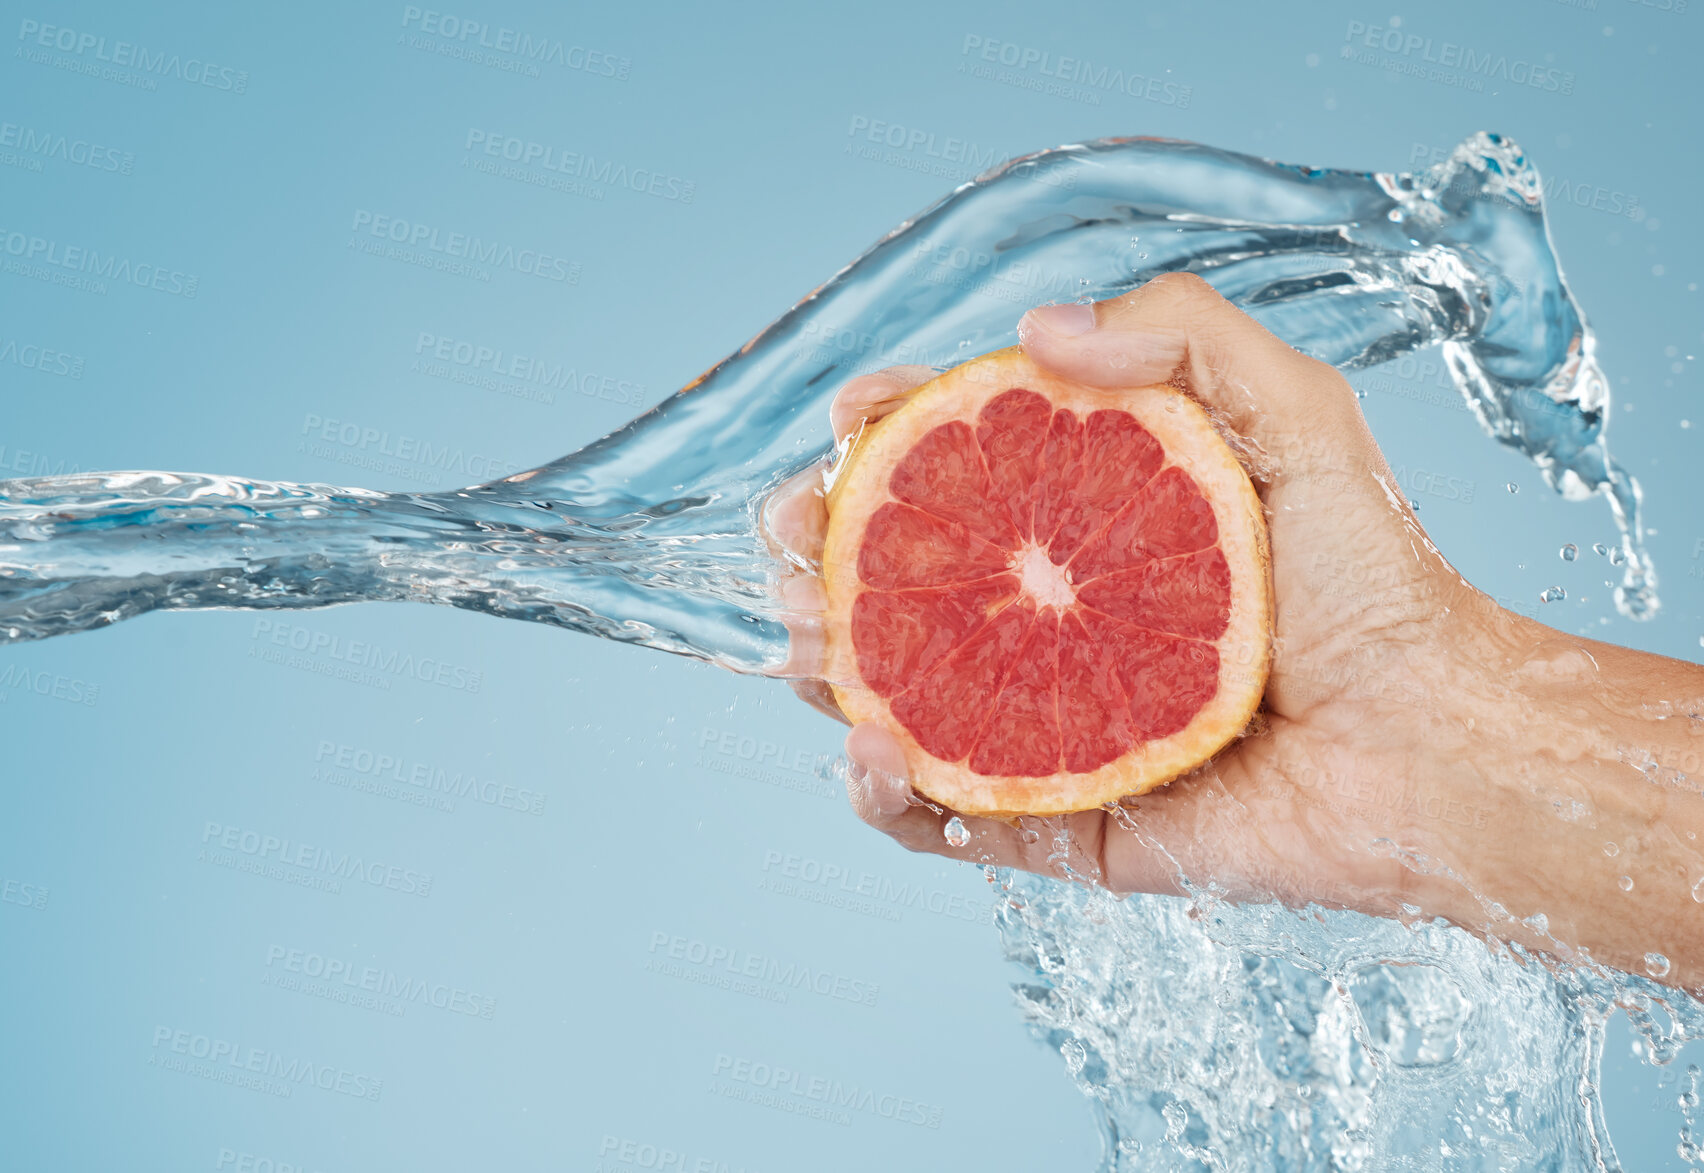 Buy stock photo Grapefruit, water and hand with a summer food for health, nutrition and diet against a blue mockup studio background. Splash, tropical and person cleaning a citrus fruit for snack with mock up space